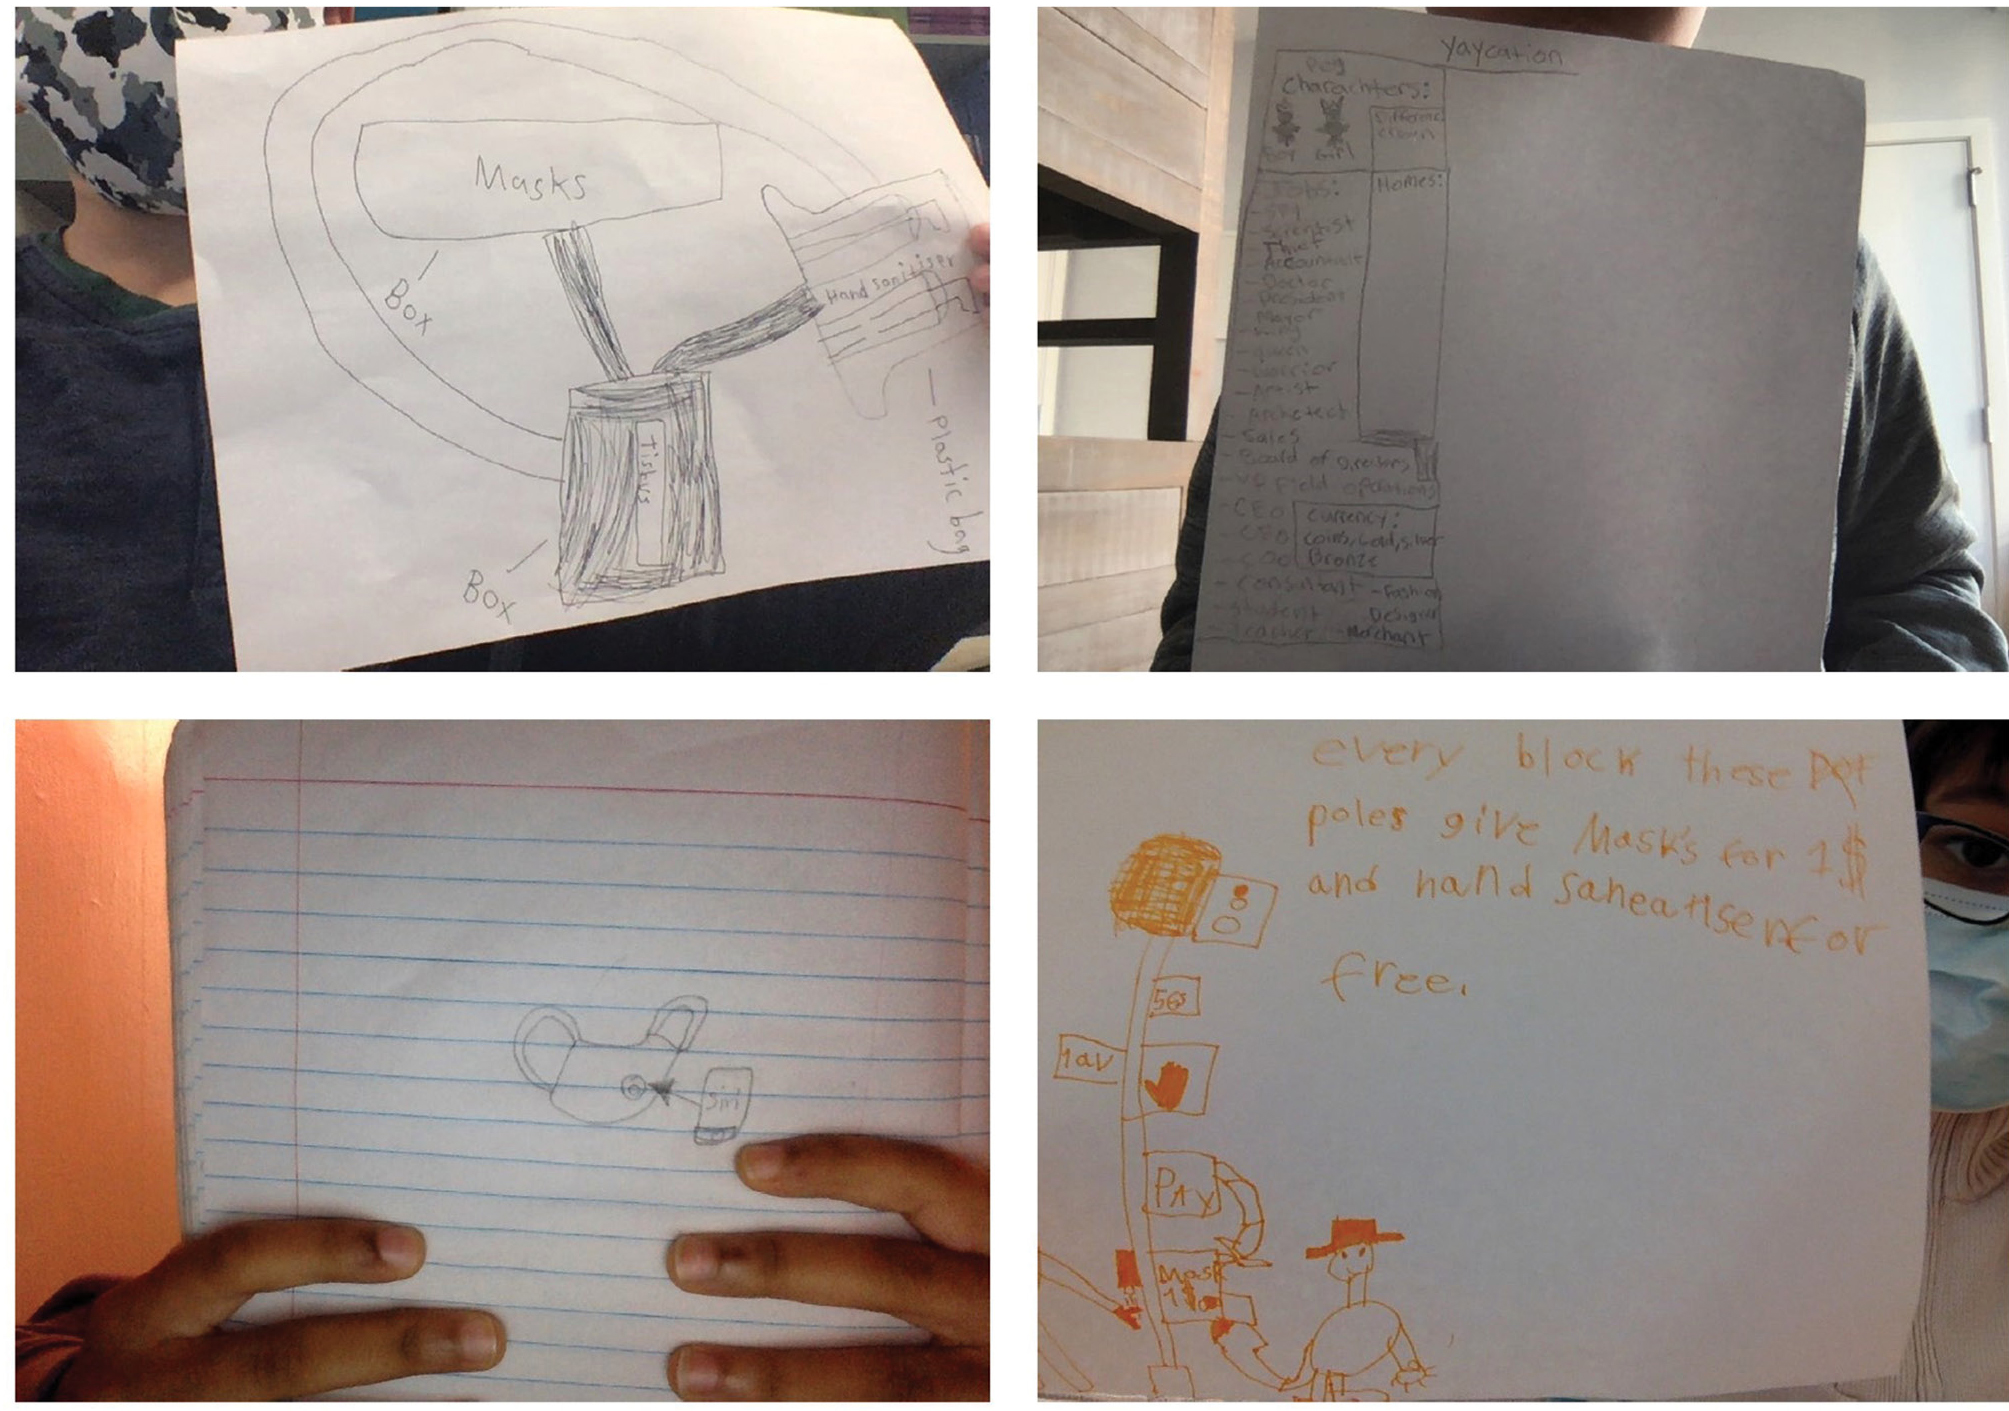 Examples of fourth-grade students’ drawings for Imagining and Planning. Students’ initial prototypes of designs related to COVID-19 included (clockwise from top left) a mask cleaner, a board game for “being lonely with no one to play with,” a dispenser of masks and sanitizer, and a tracker to put on masks in case you lose them.